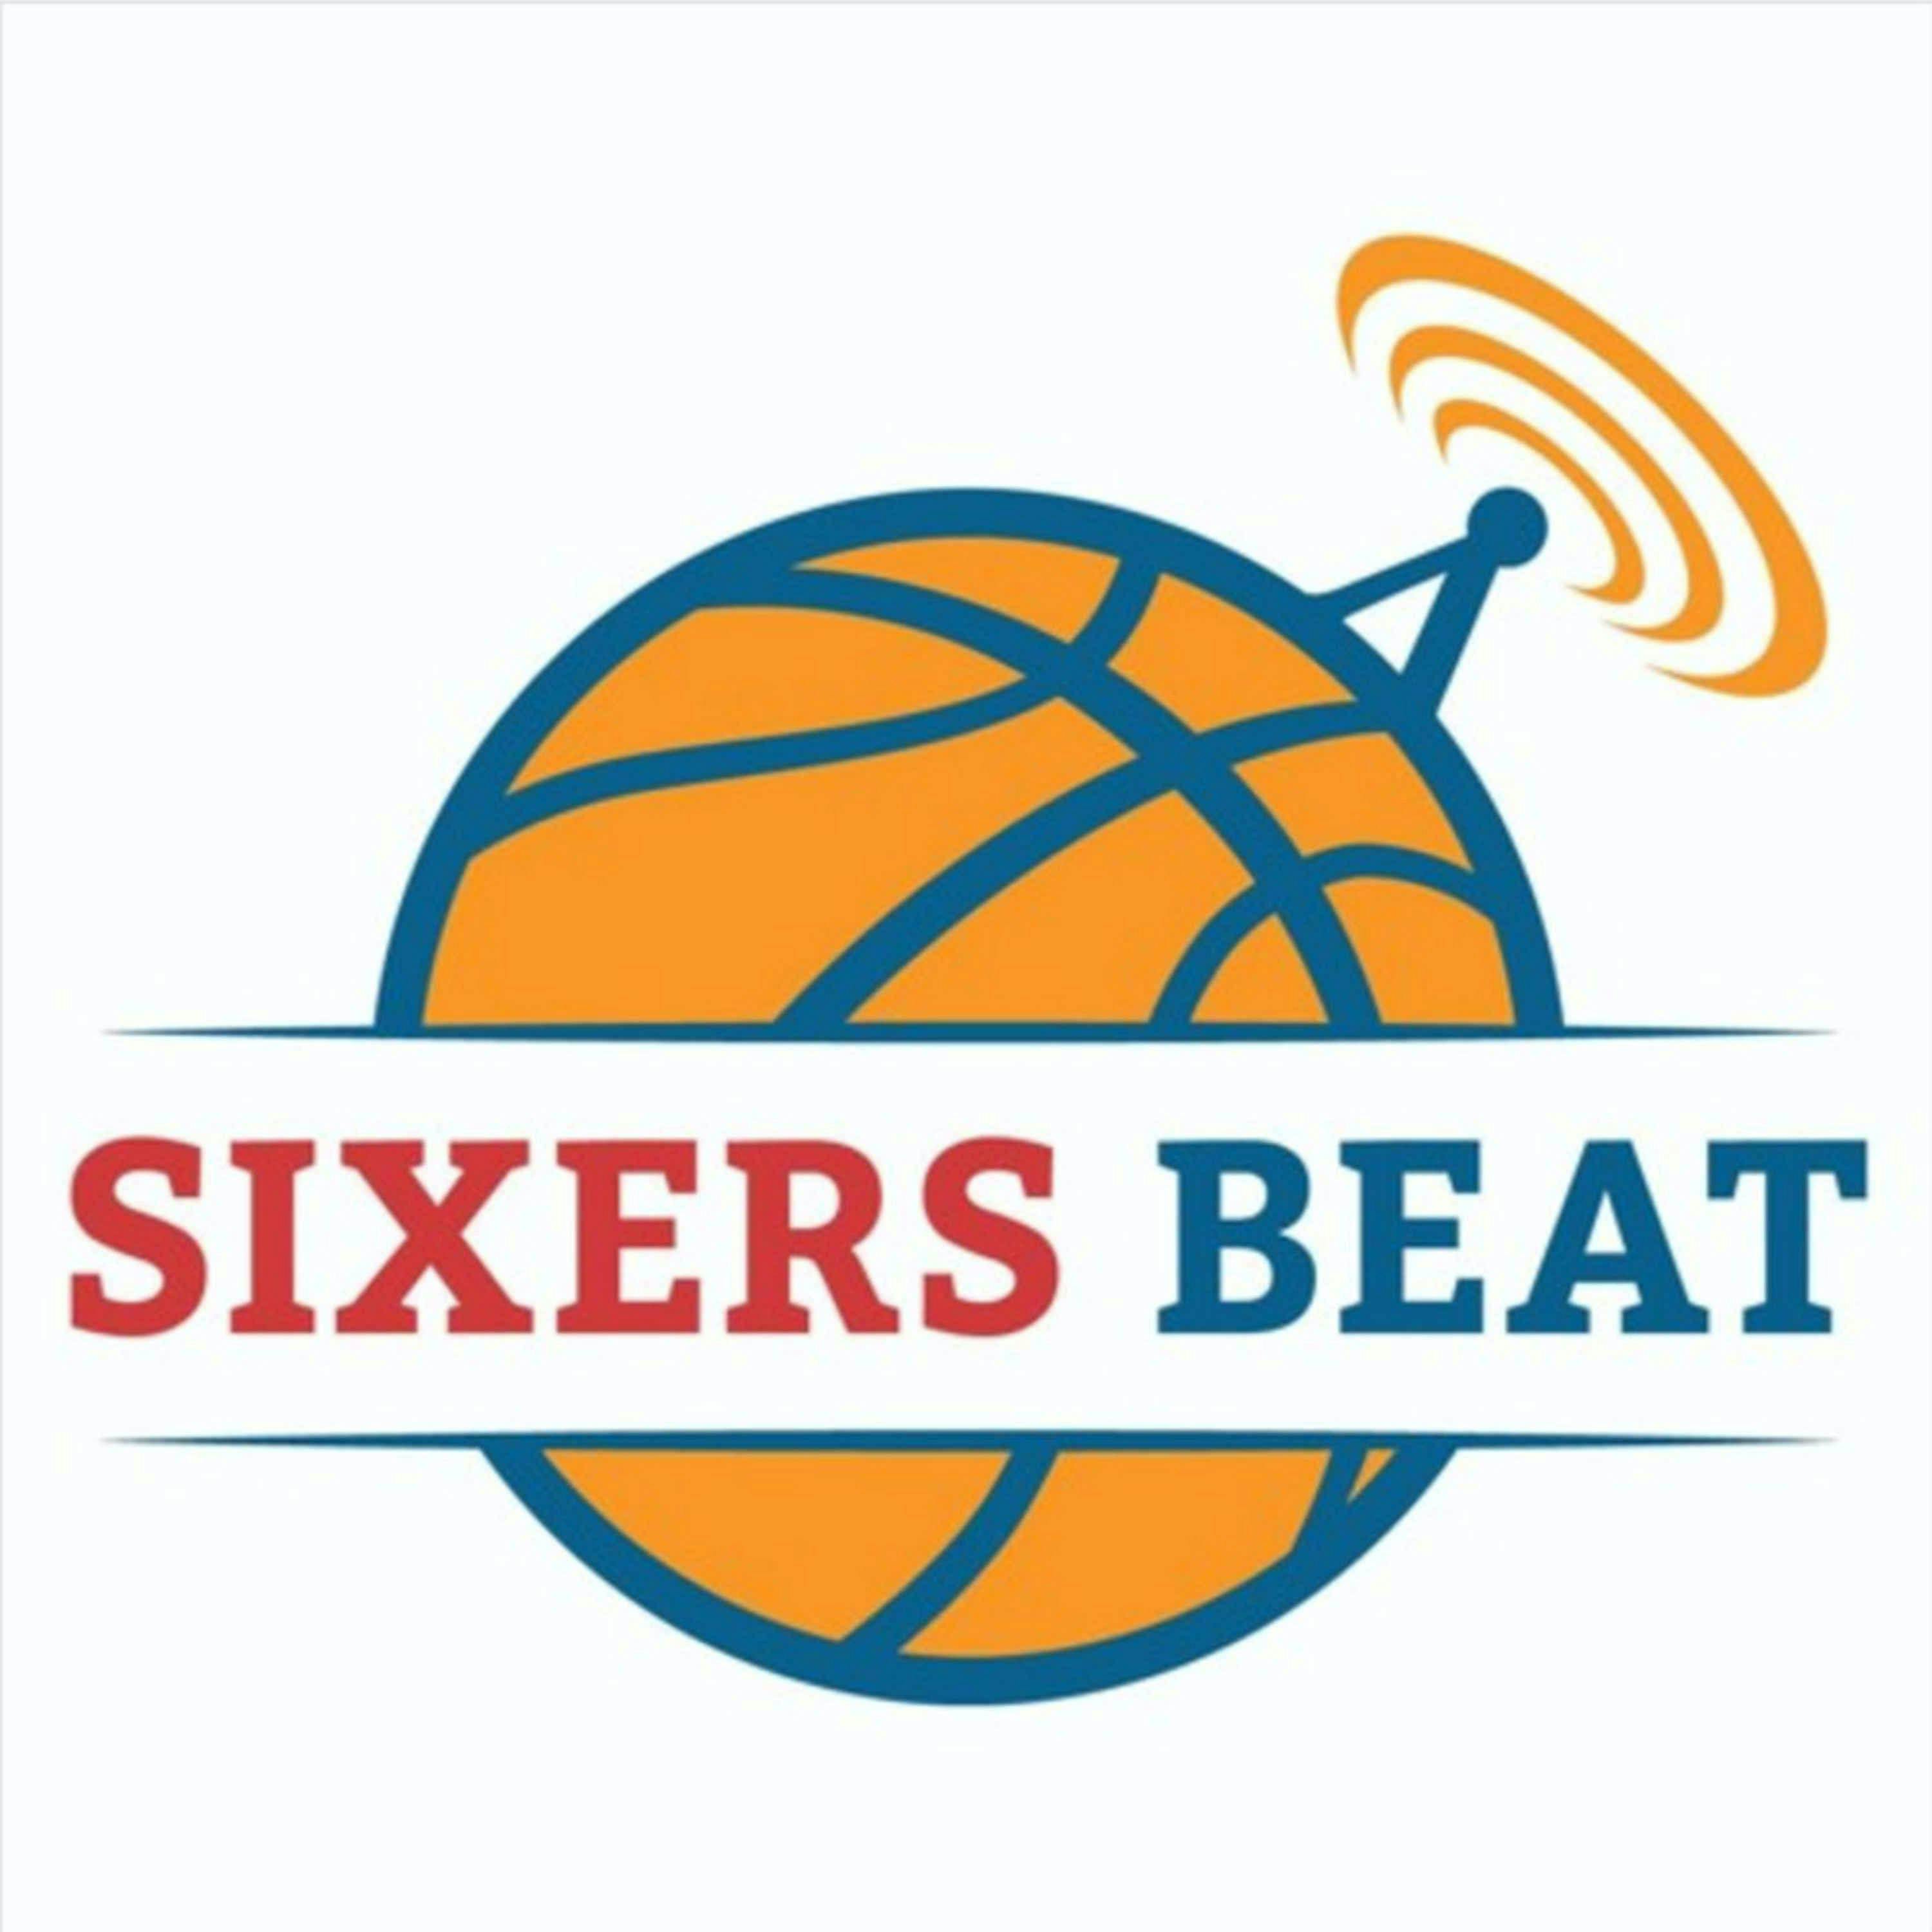 #189 - What Al Horford brings to the 76ers